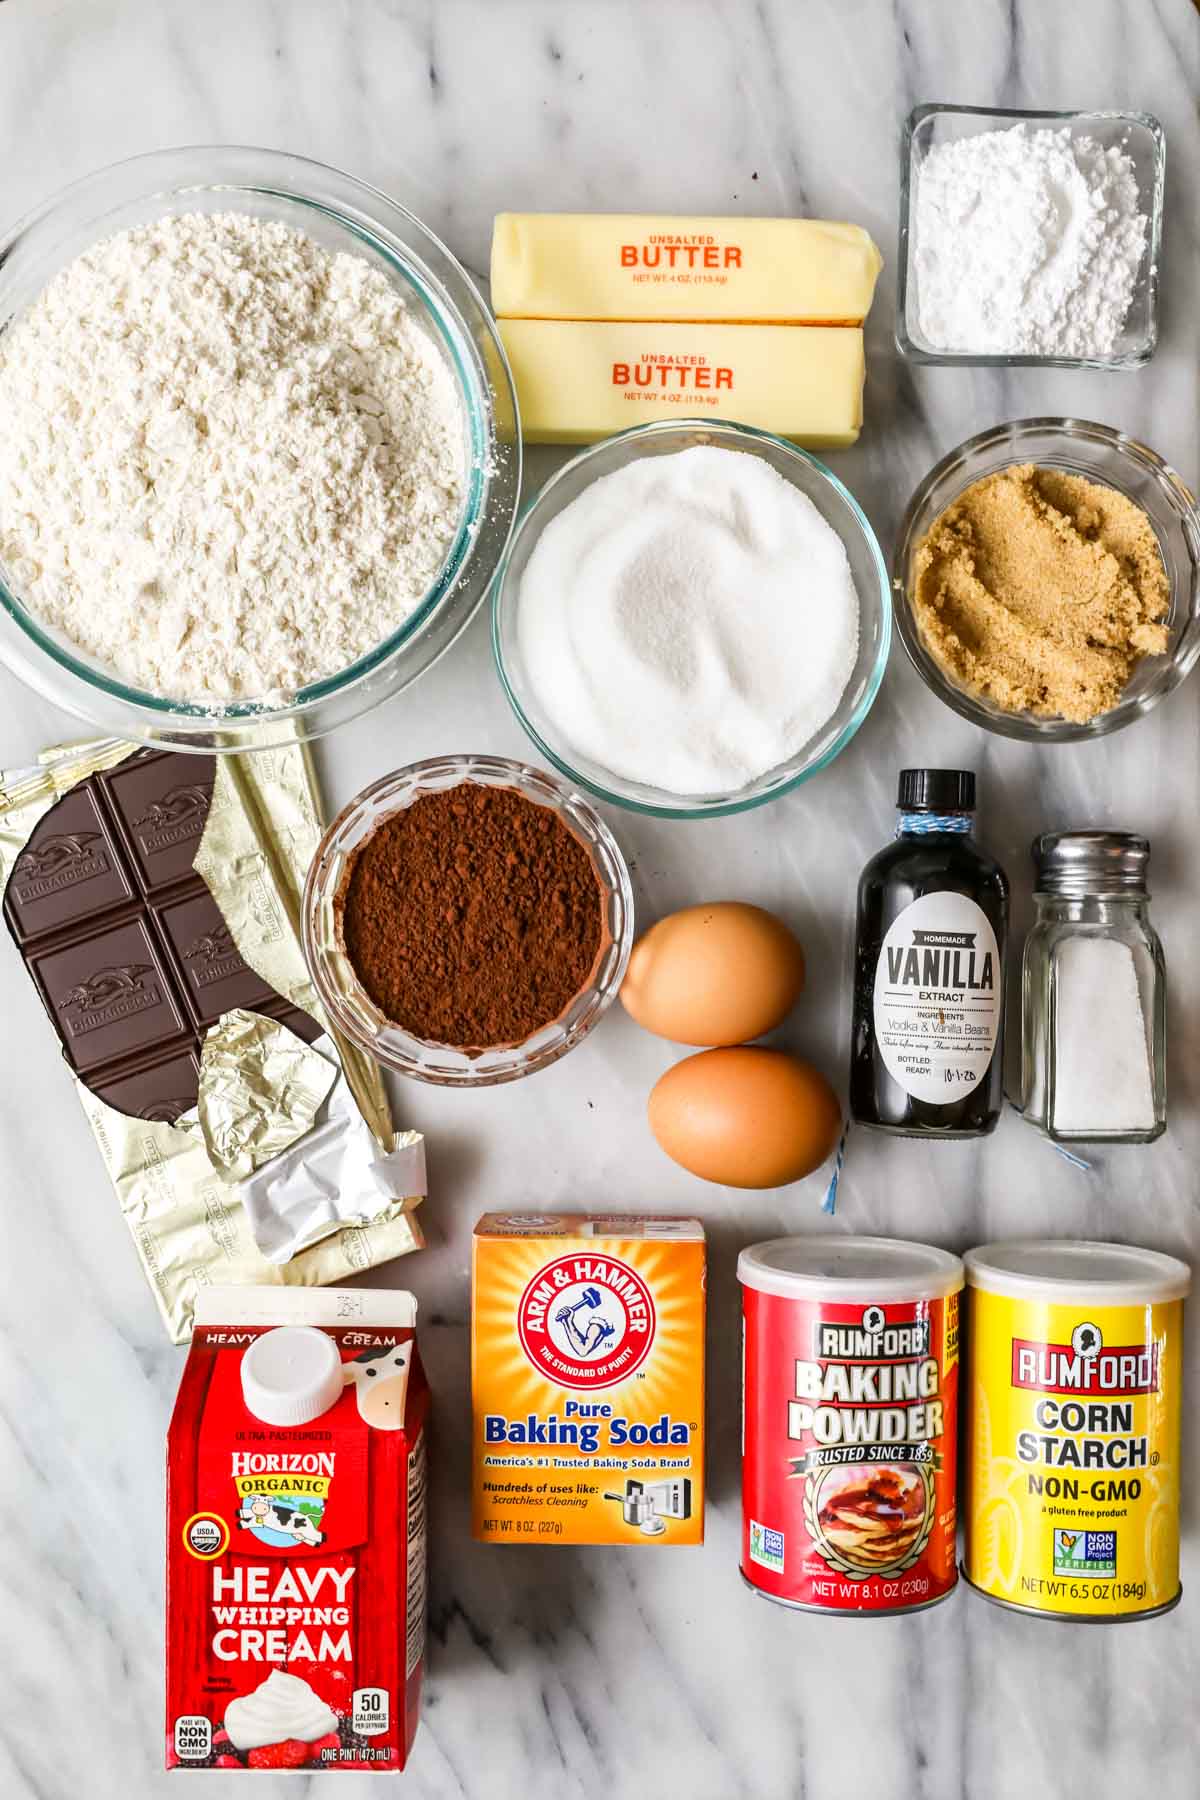 Overhead view of ingredients including chocolate, cocoa powder, flour, and more.